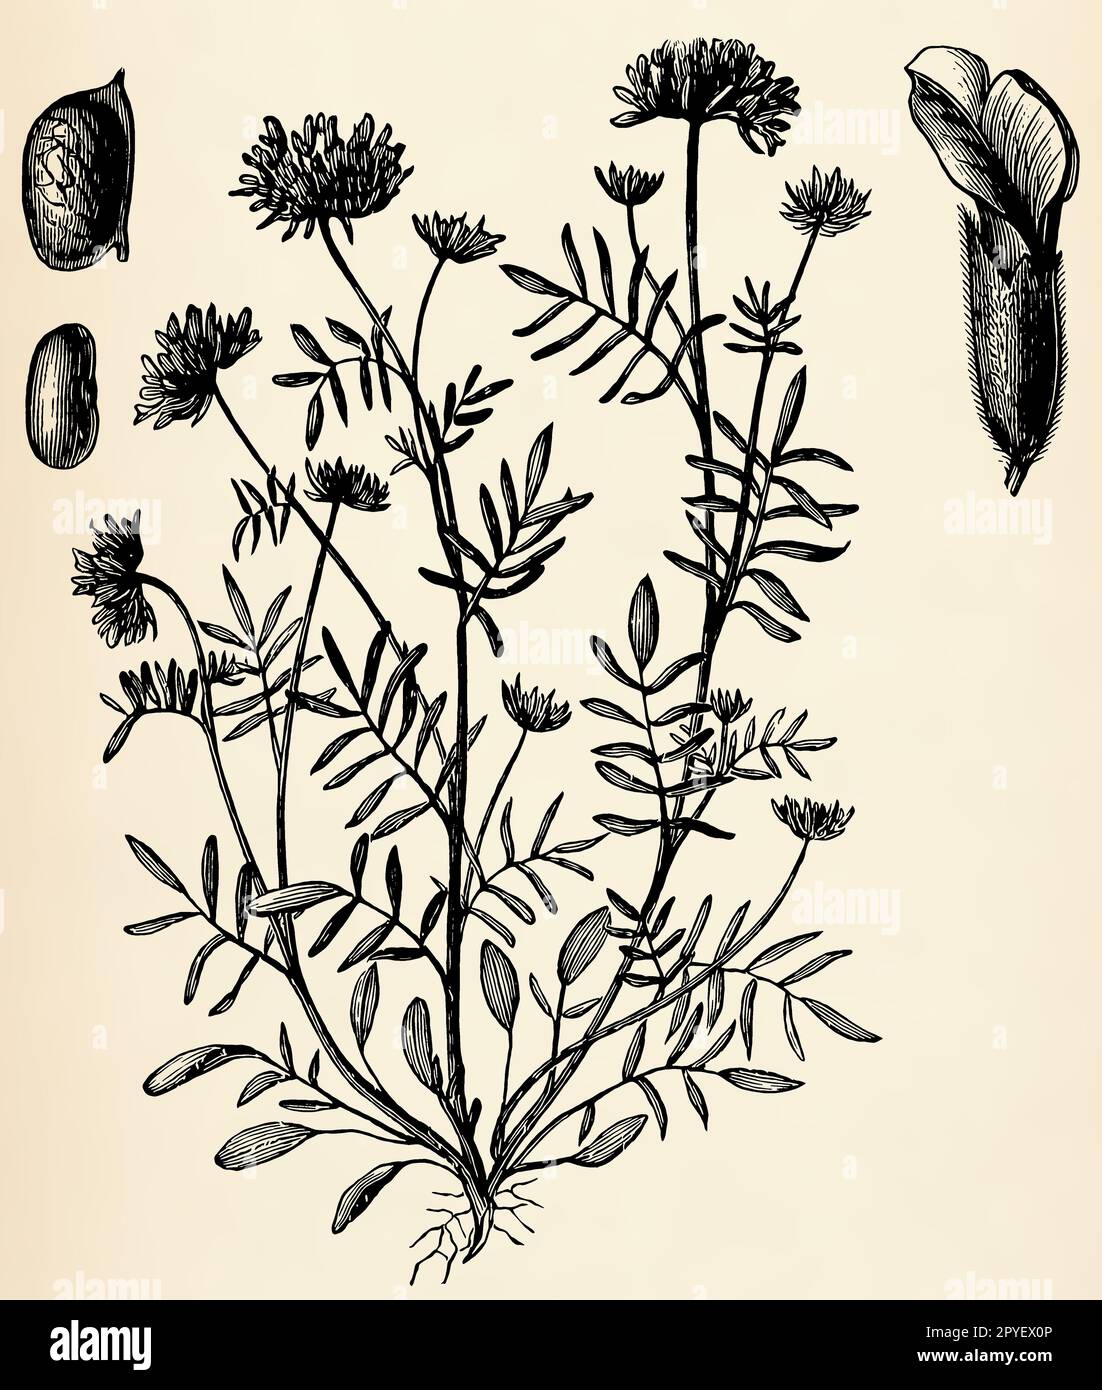 Root system, stem, flowers and fruits of Anthyllis vulneraria. Antique stylized illustration. Stock Photo